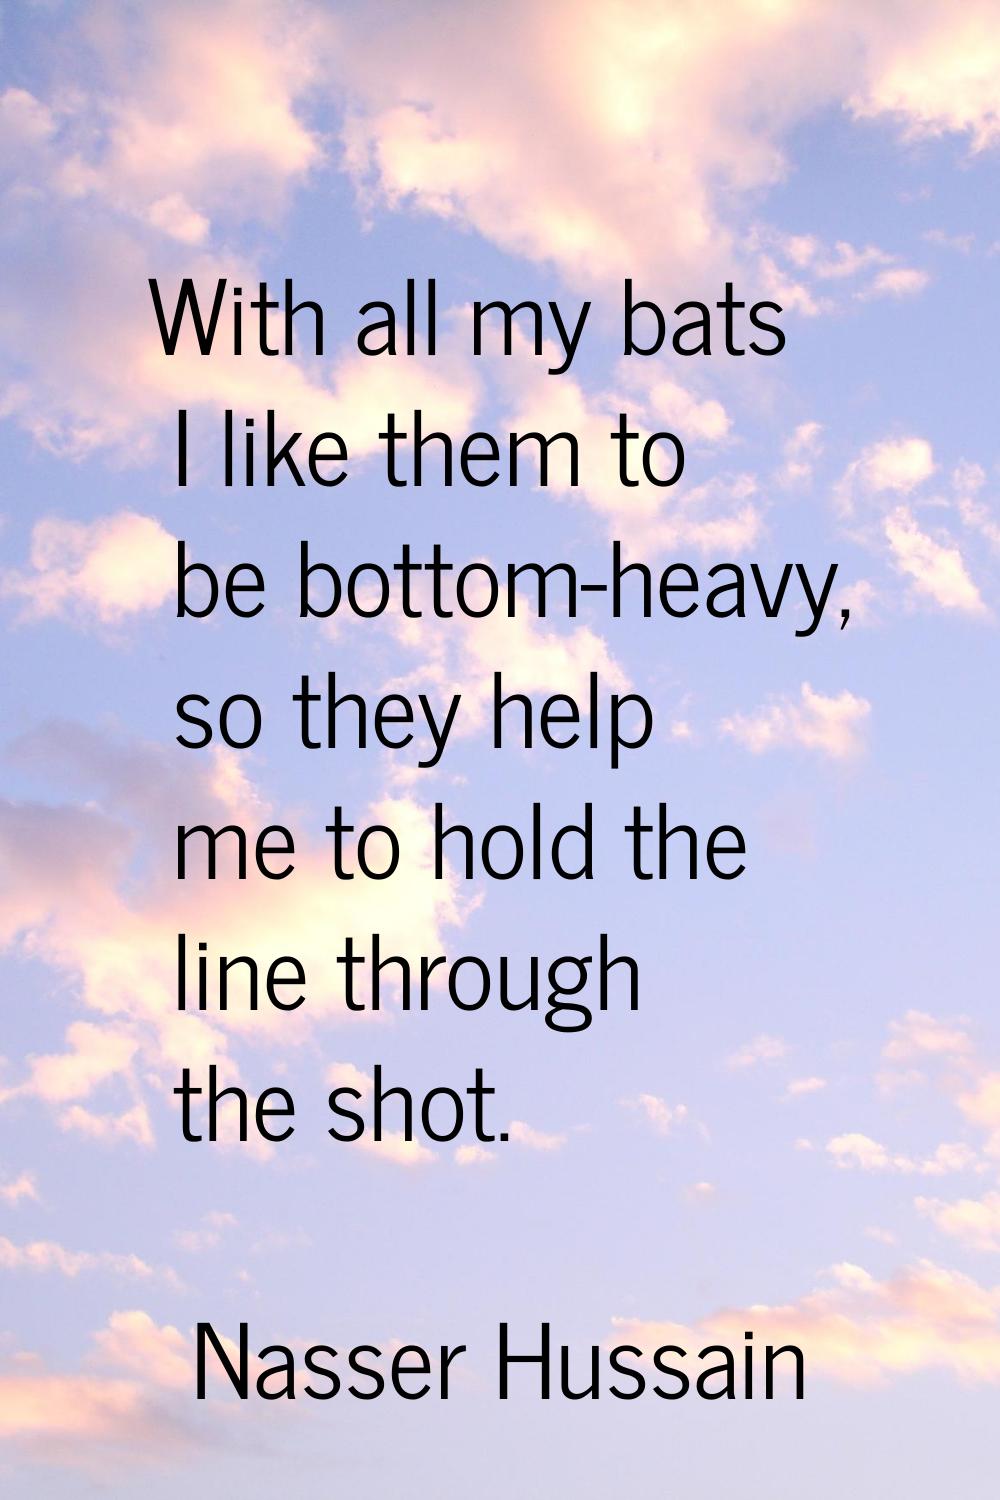 With all my bats I like them to be bottom-heavy, so they help me to hold the line through the shot.